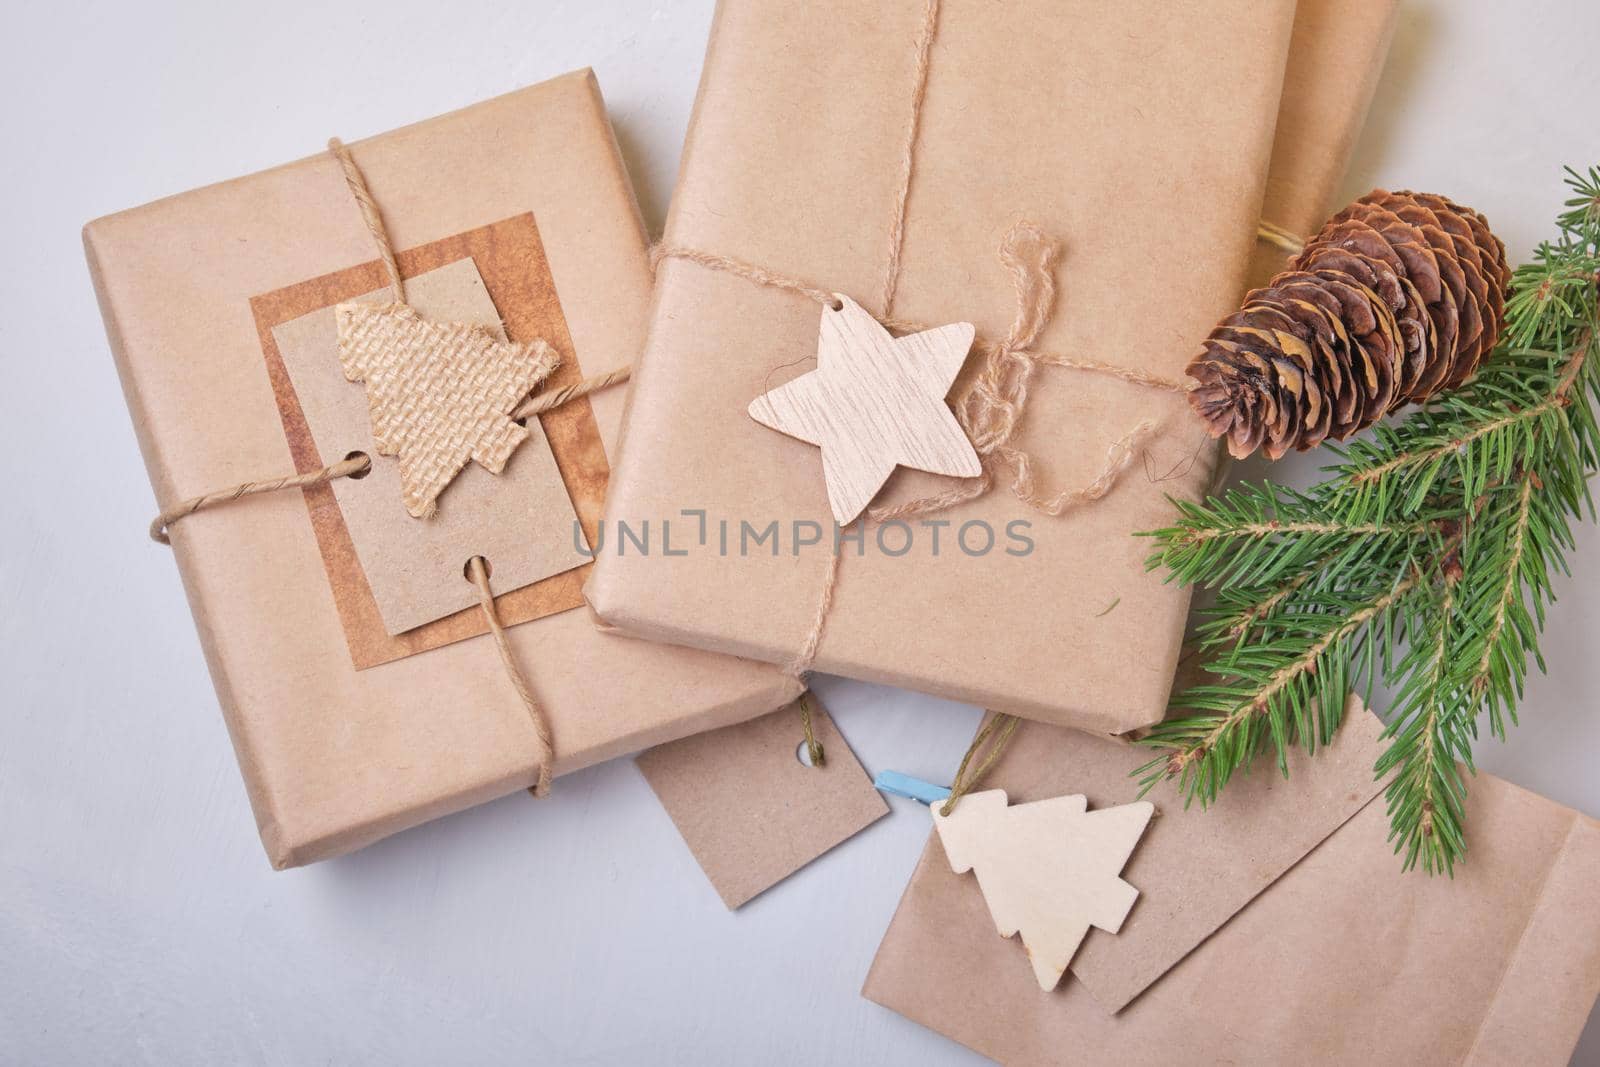 several boxes of gifts packed in eco paper on the table, zero waste lifestyle concept, packaging for DIY gifts, top view, gray background, eco christmas